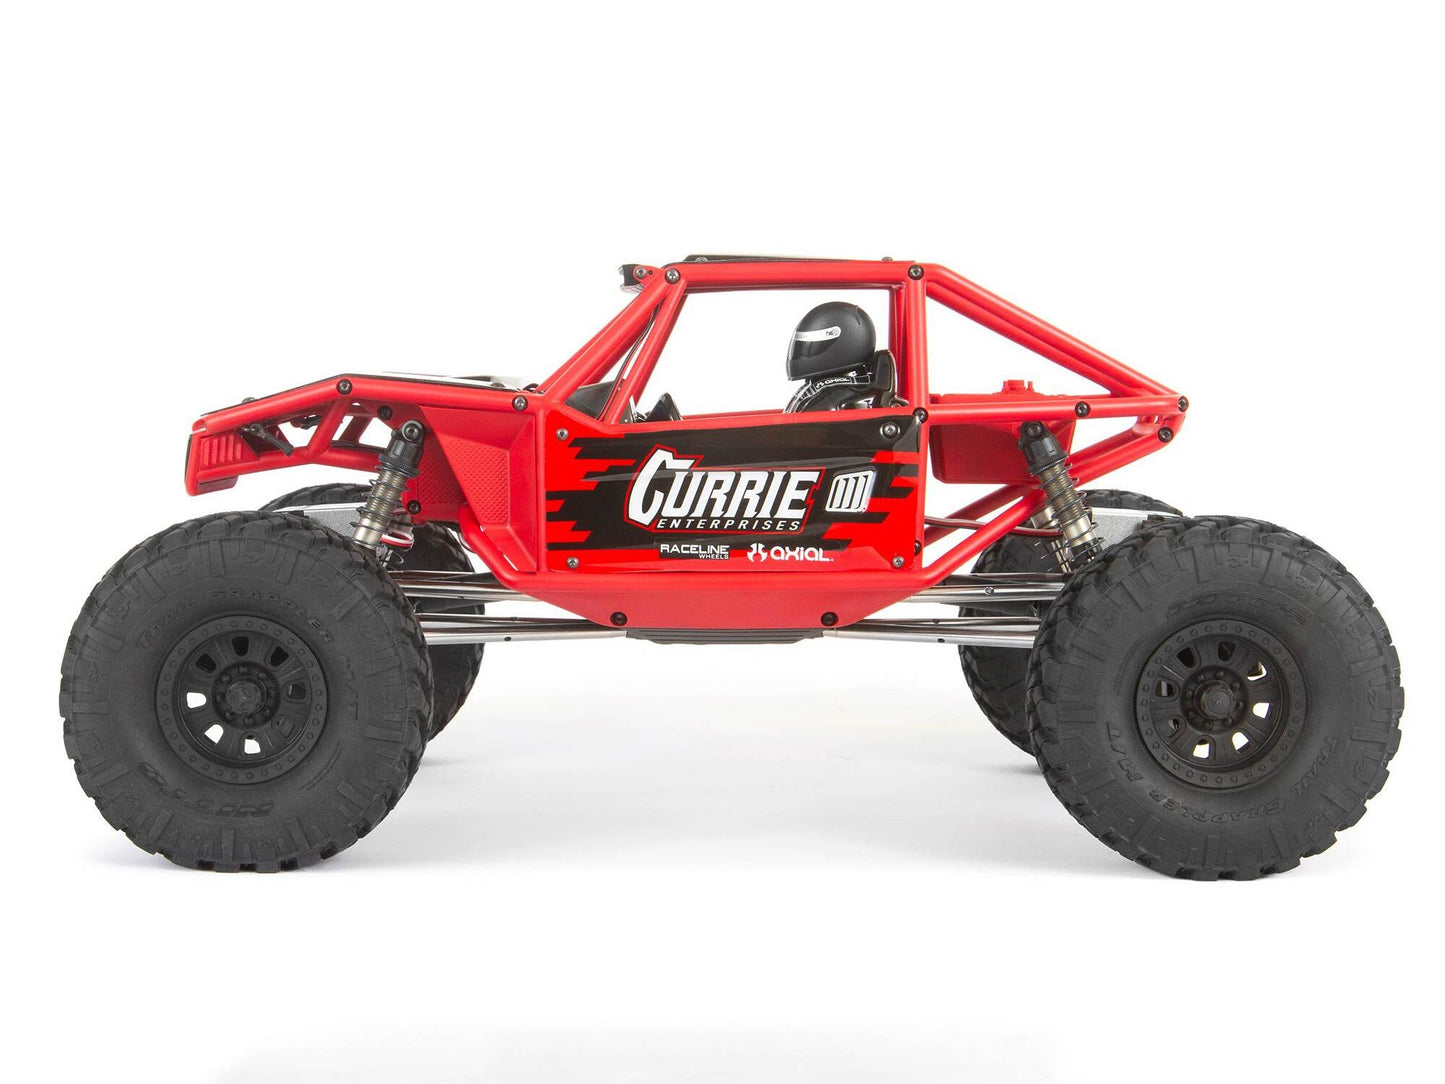 AXIAL 1/10 Capra 1.9 4WS Unlimited Trail Buggy RTR, Black  AXI03022BT2 Red AXI03022BT1  shadow stock